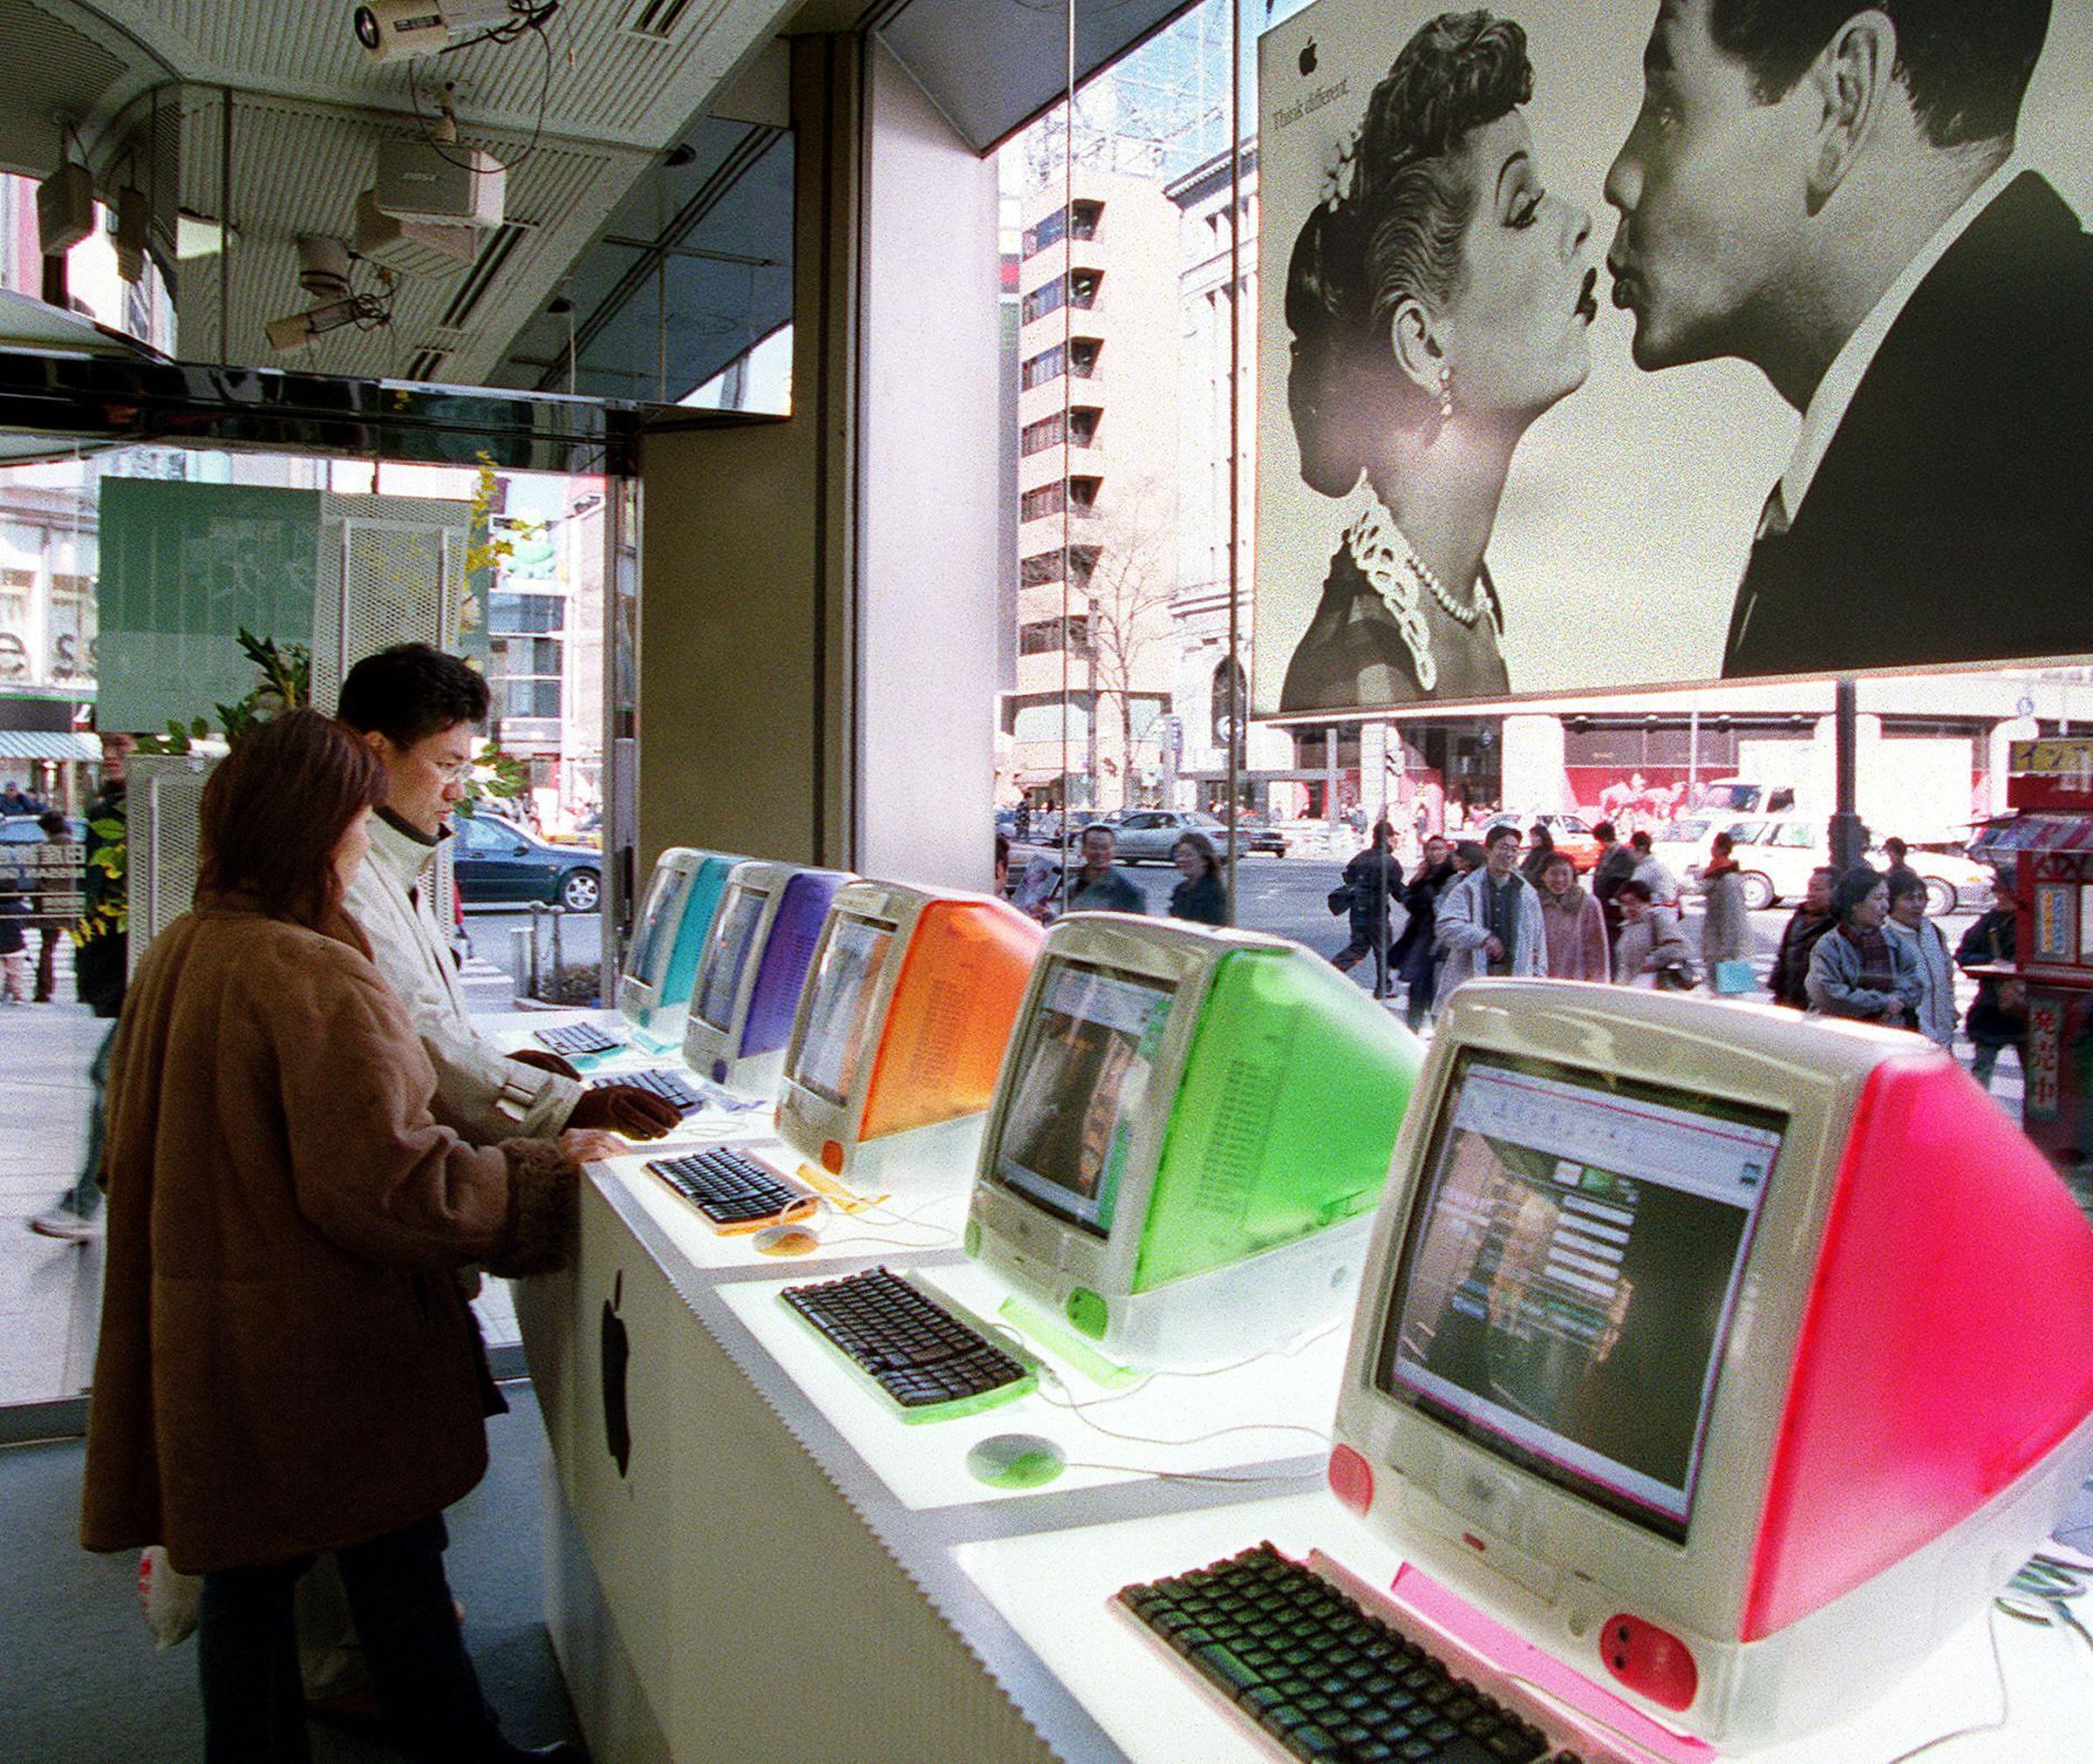 Several iMacs sit on a counter in a showroom as two people look at them.